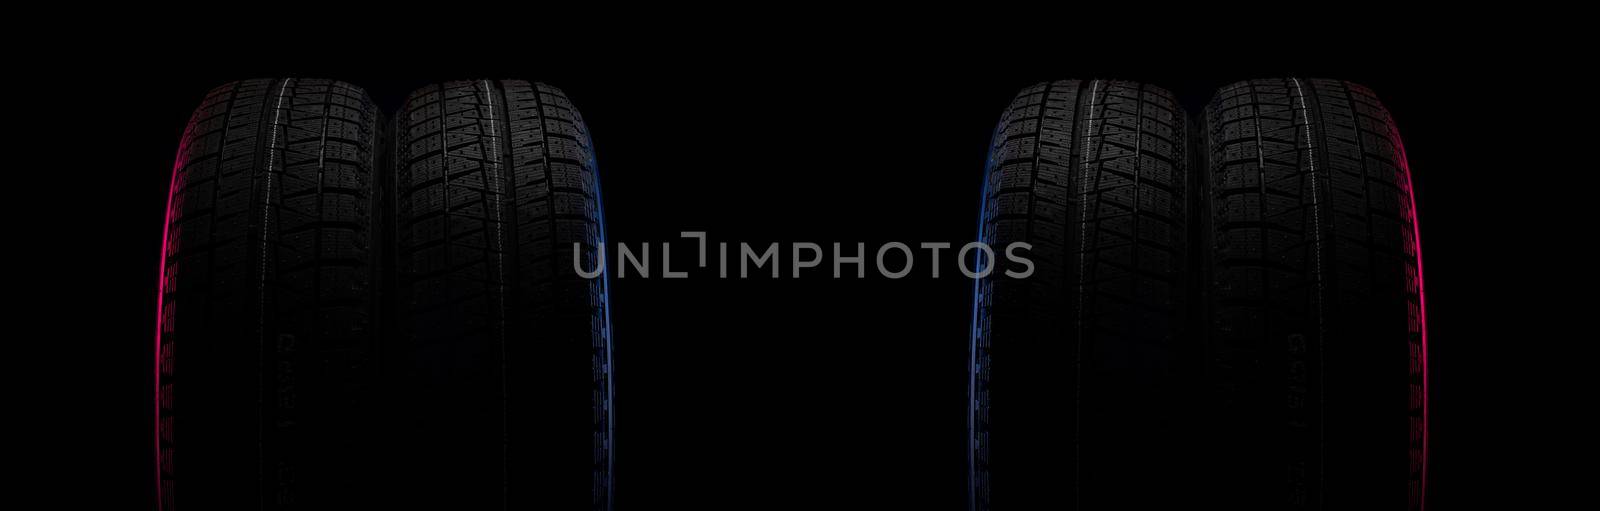 two black tires on a black background with a tread for driving on snow.